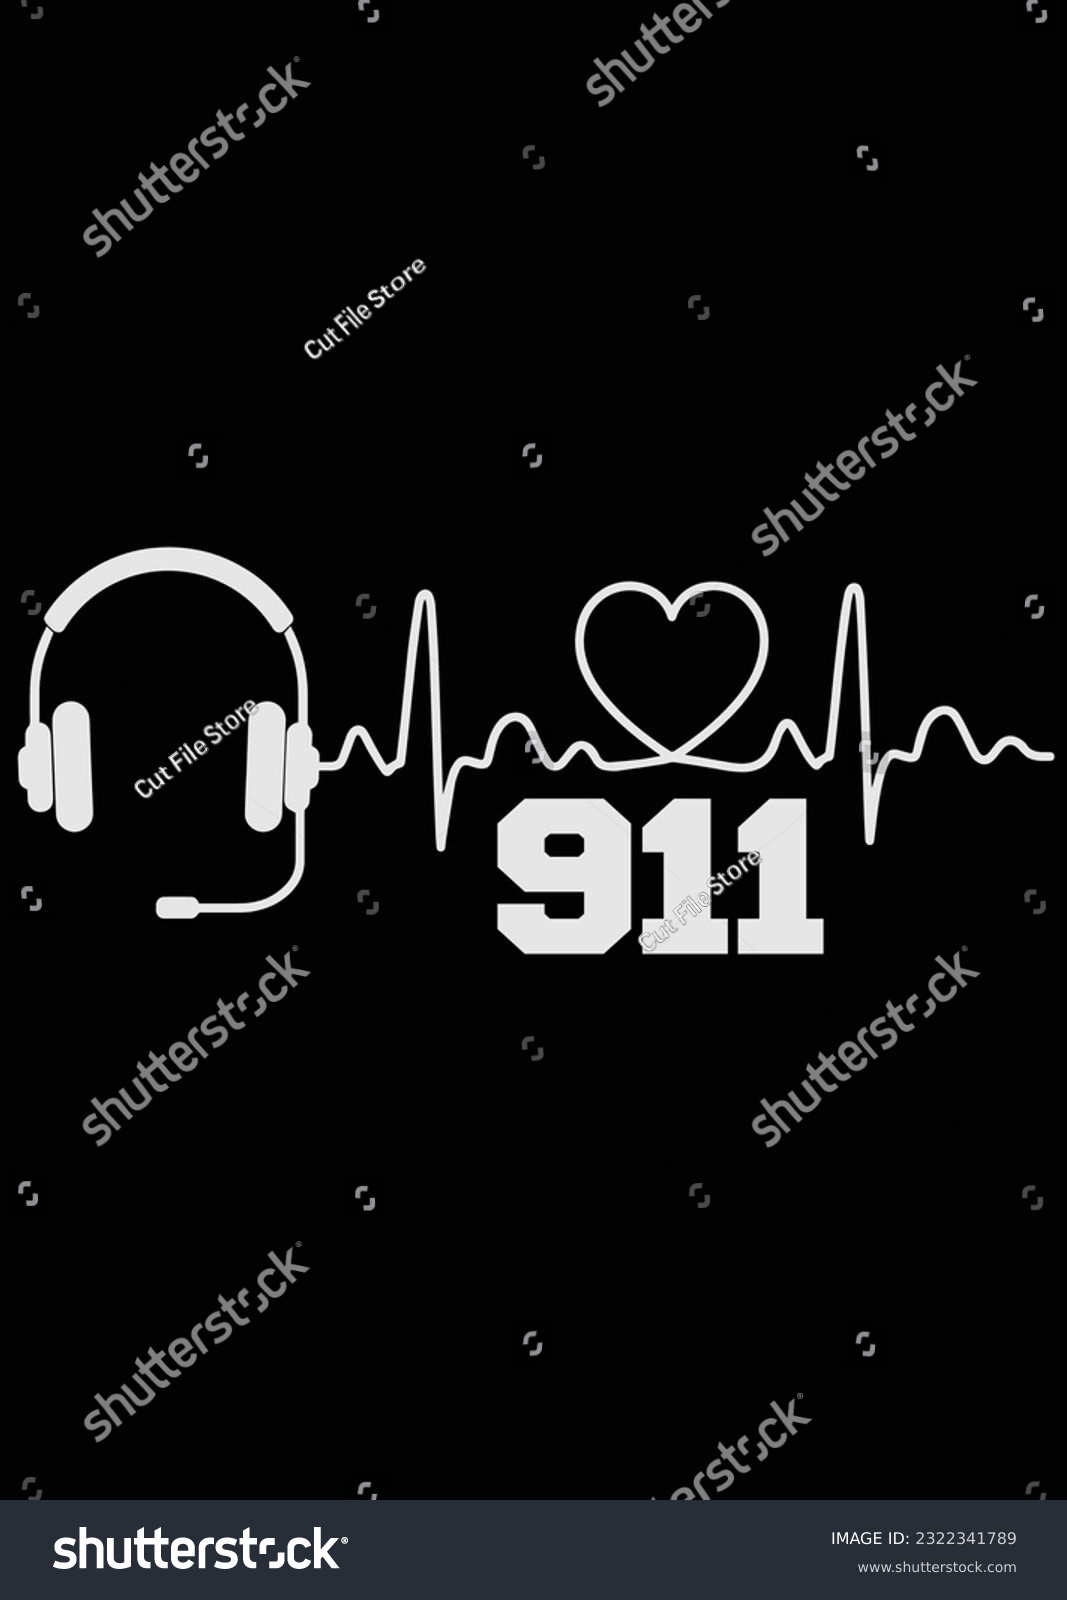 SVG of 
911 Dispatcher Heartbeat Headset eps cut file for cutting machine svg